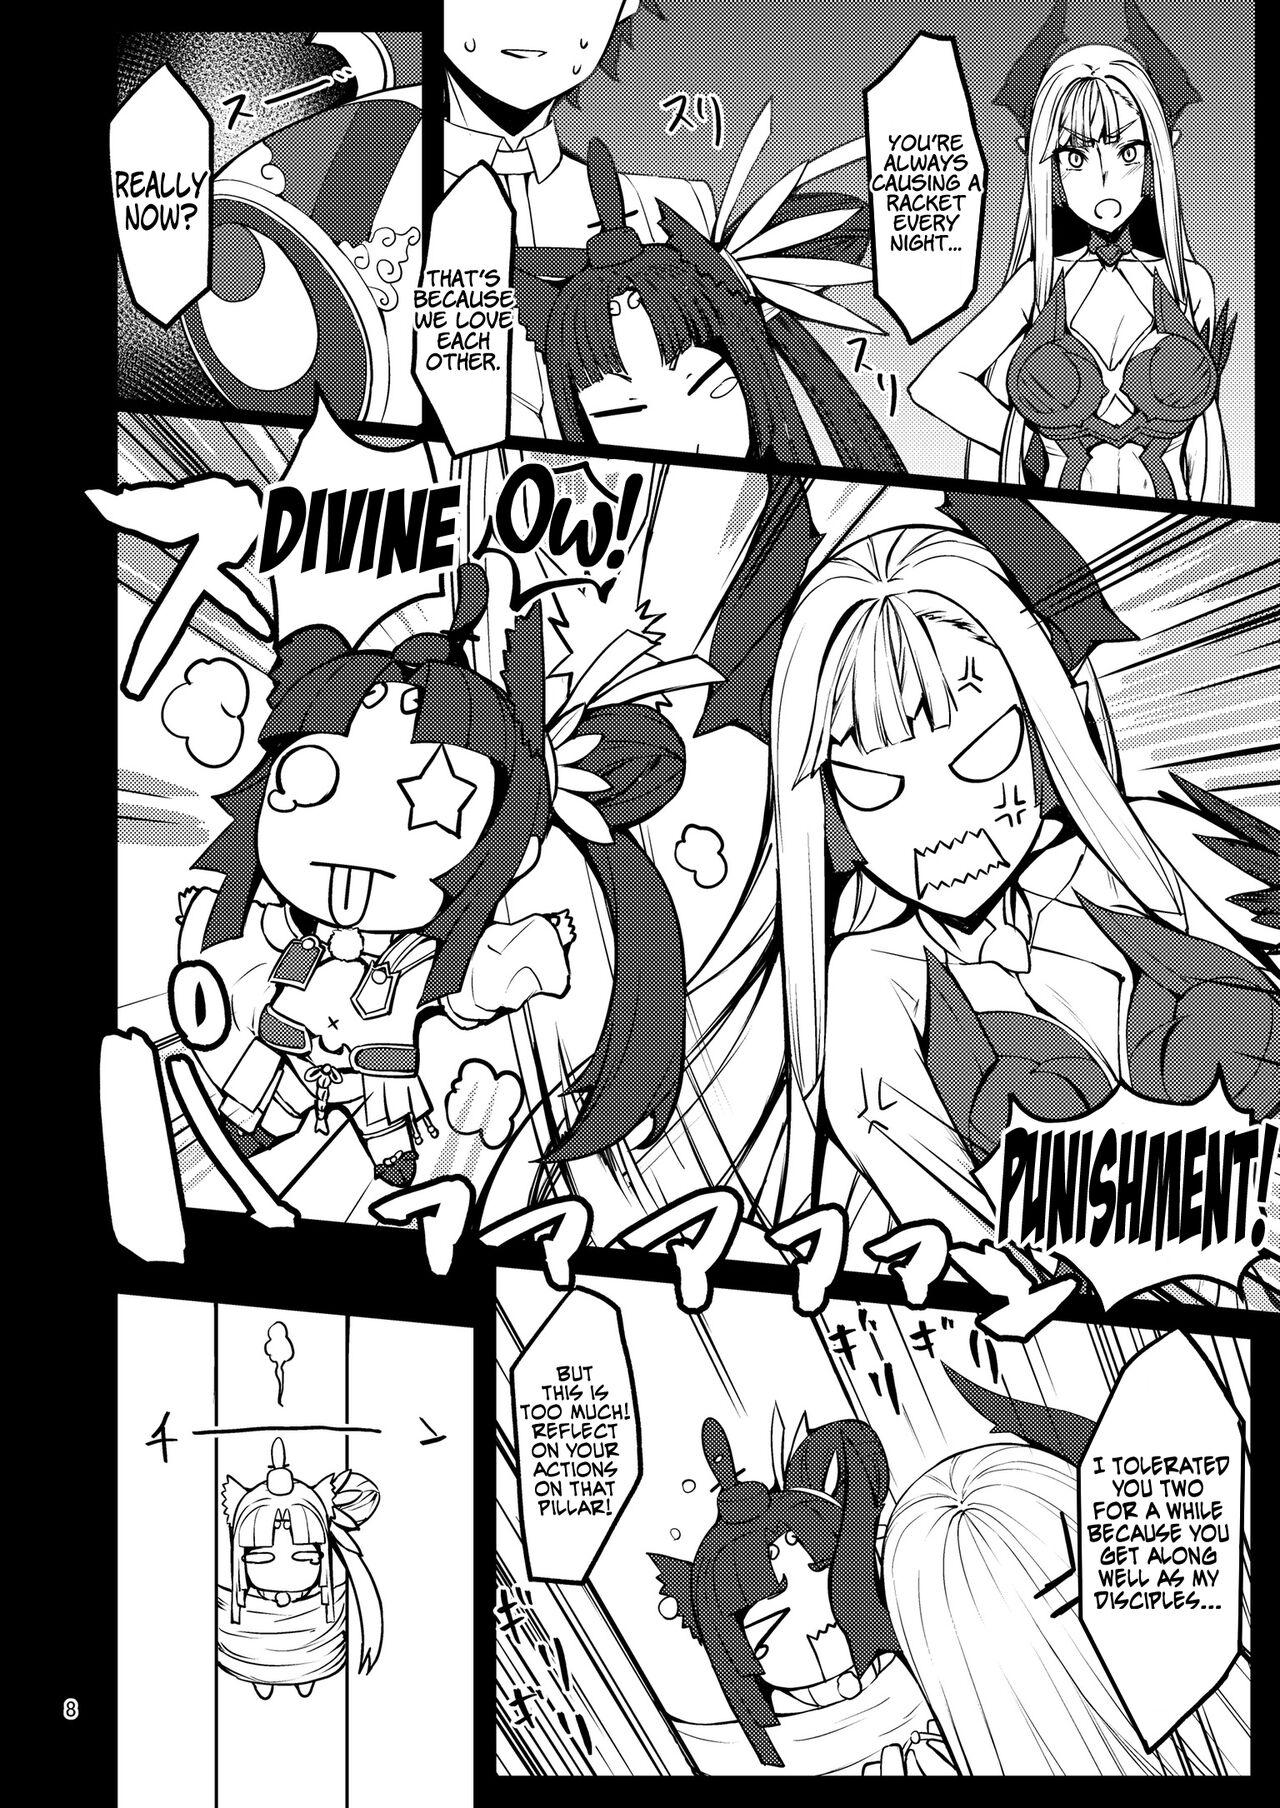 Hoe Kiichi Hougen Book: Mentor - Fate grand order Masterbation - Page 7